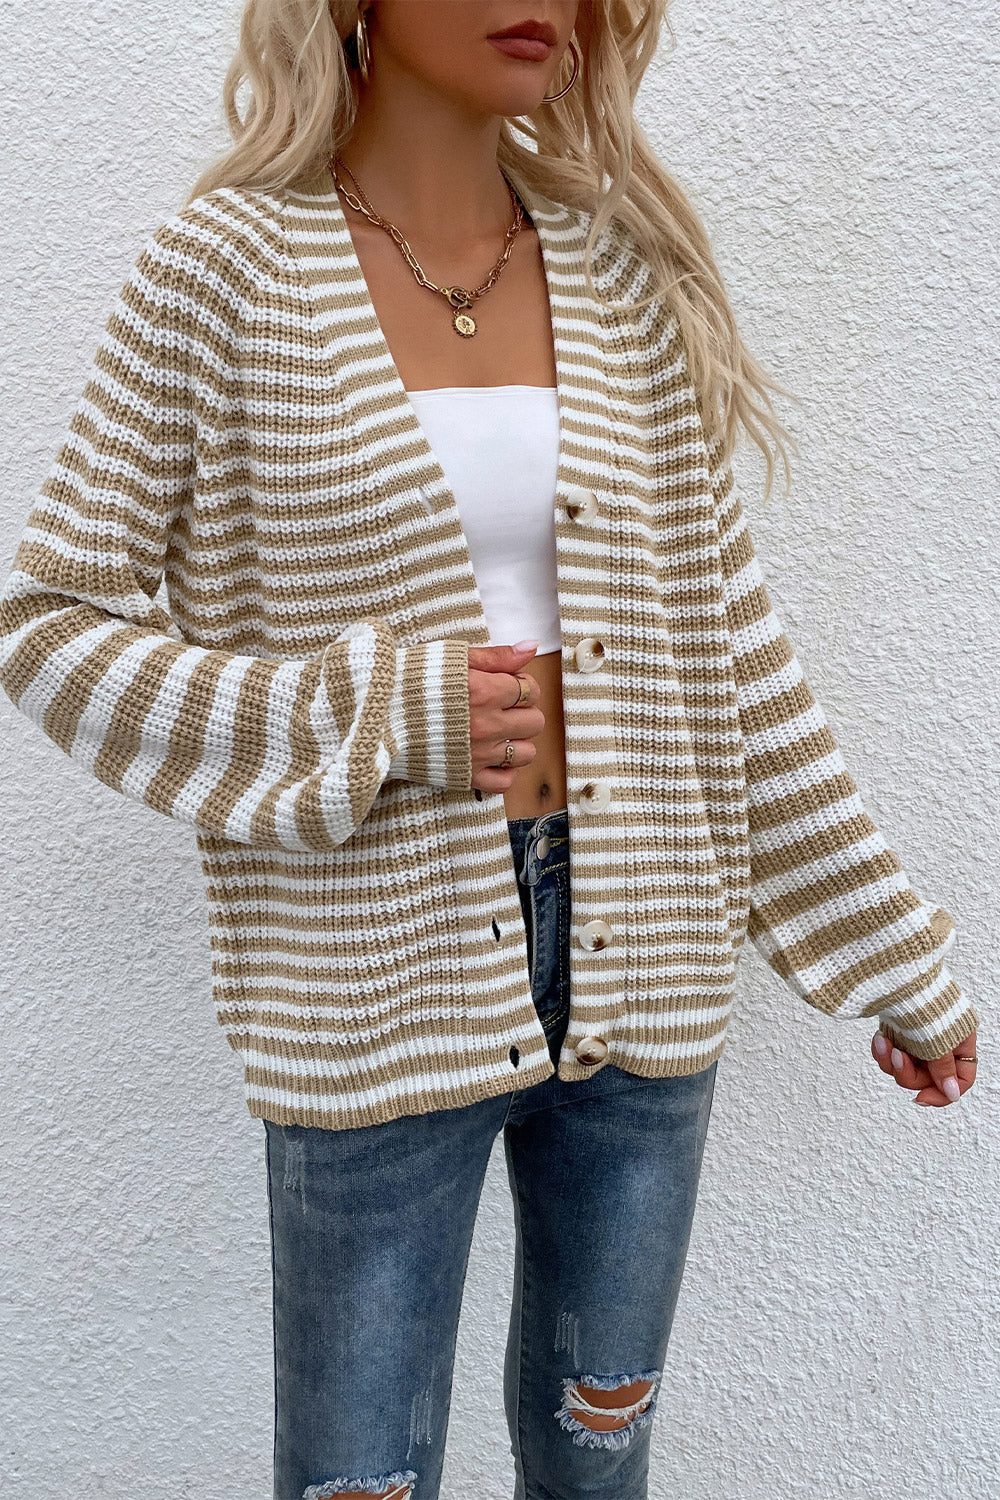 Striped V-Neck Button-Down Cardigan - Women’s Clothing & Accessories - Shirts & Tops - 5 - 2024